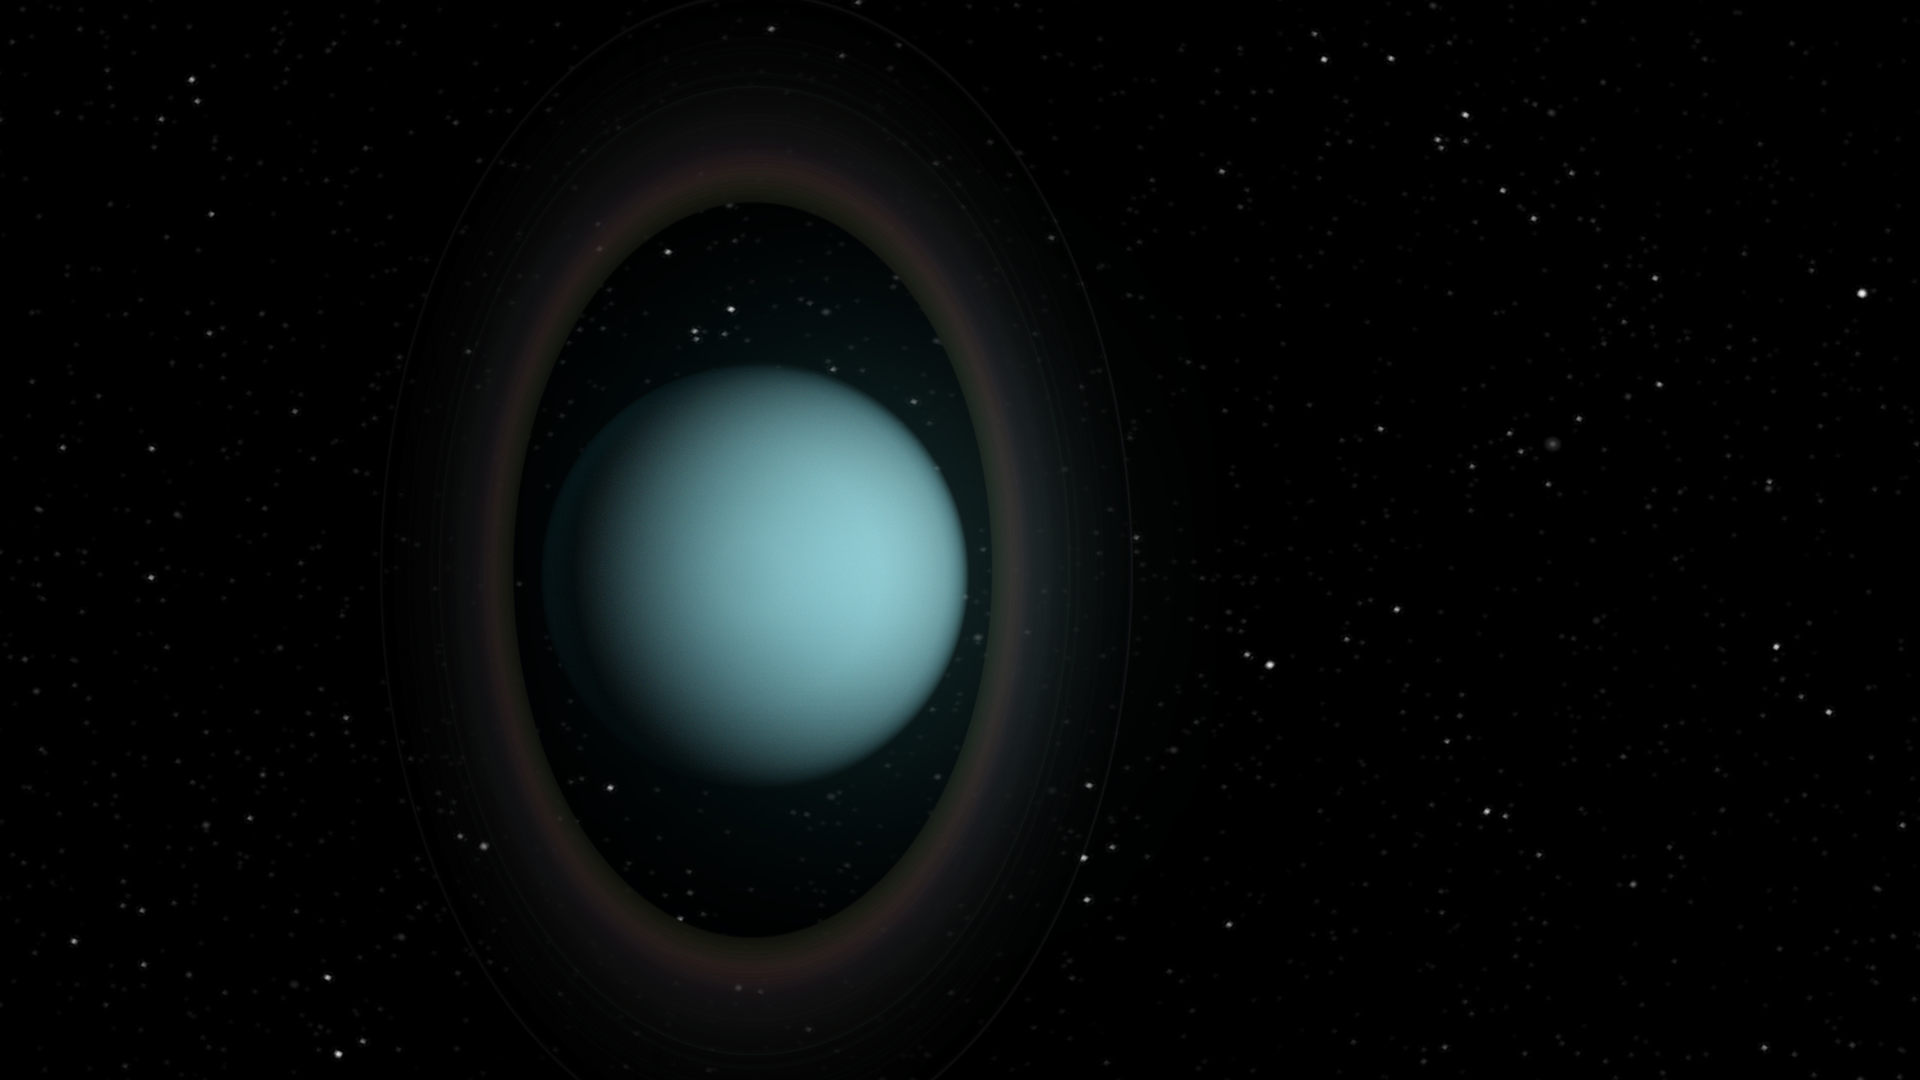 <p>Artist impression of the planet Uranus and its dark ring system. Rather than observing the reflected sunlight from these rings, astronomers have imaged the millimeter and mid-infrared “glow” naturally emitted by the frigidly cold particles of the rings themselves. Credit: NRAO/AUI/NSF; S. Dagnello</p>
